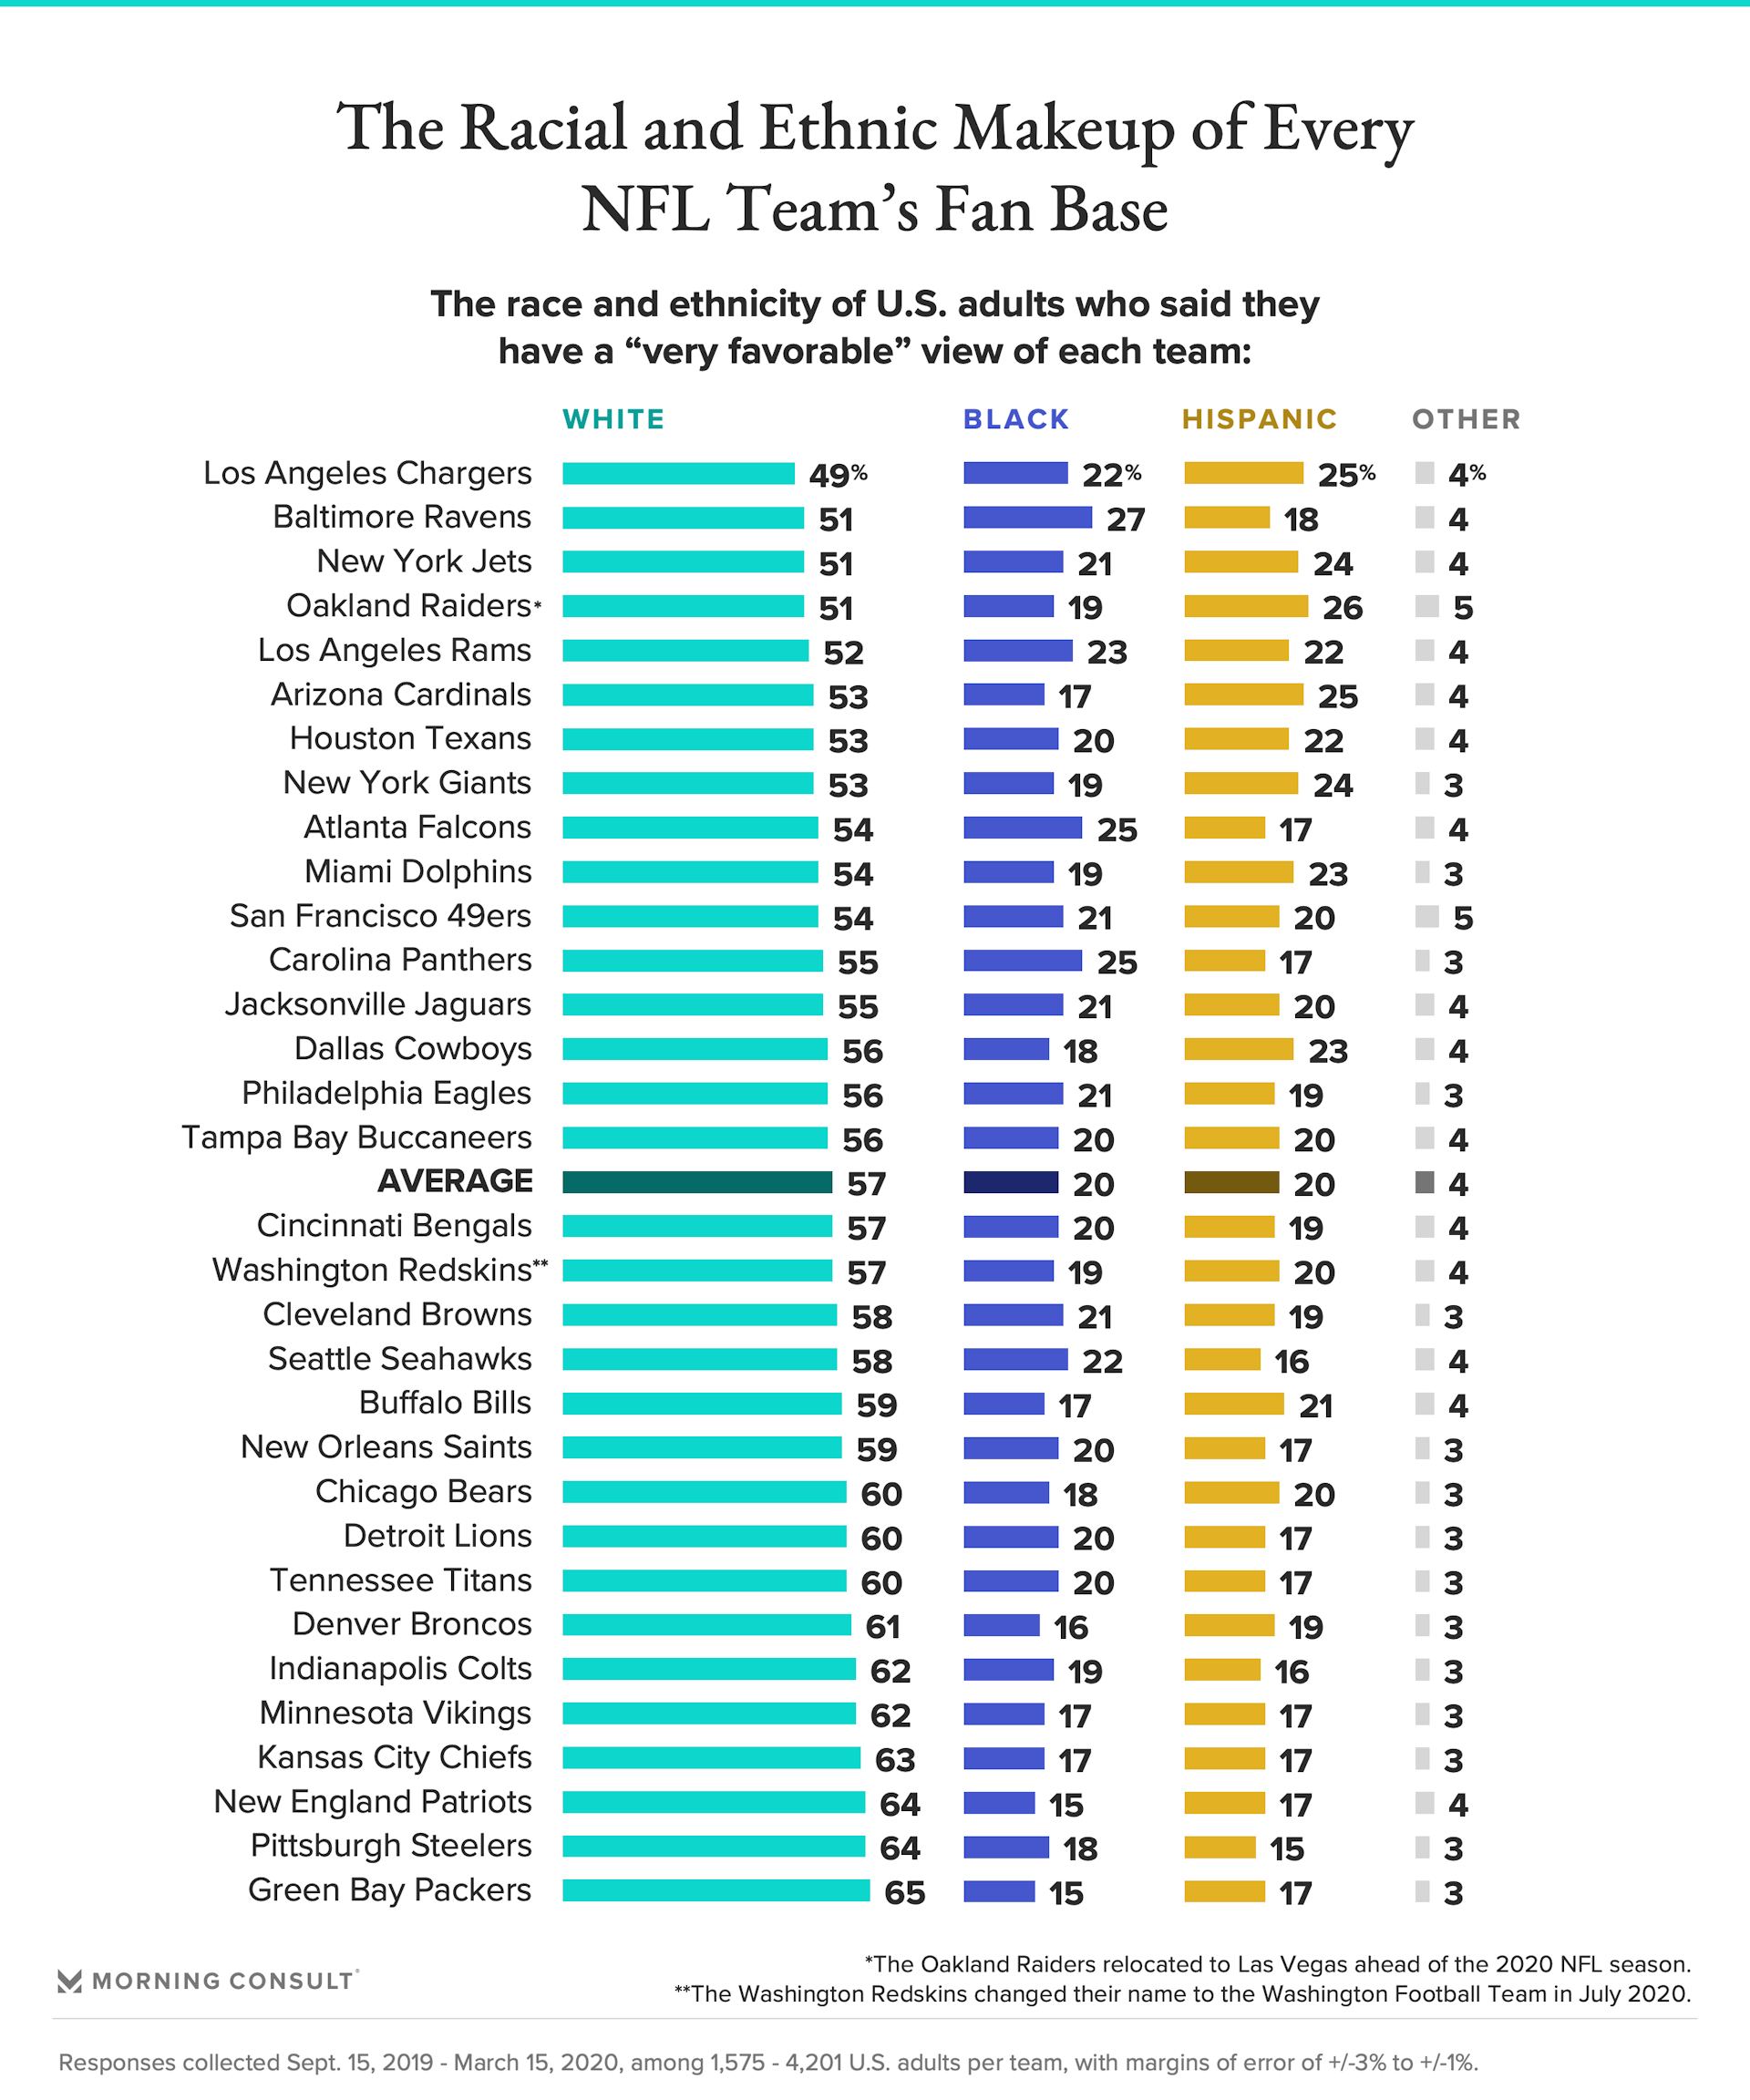 Chart with racial and ethnic makeup of NFL fans